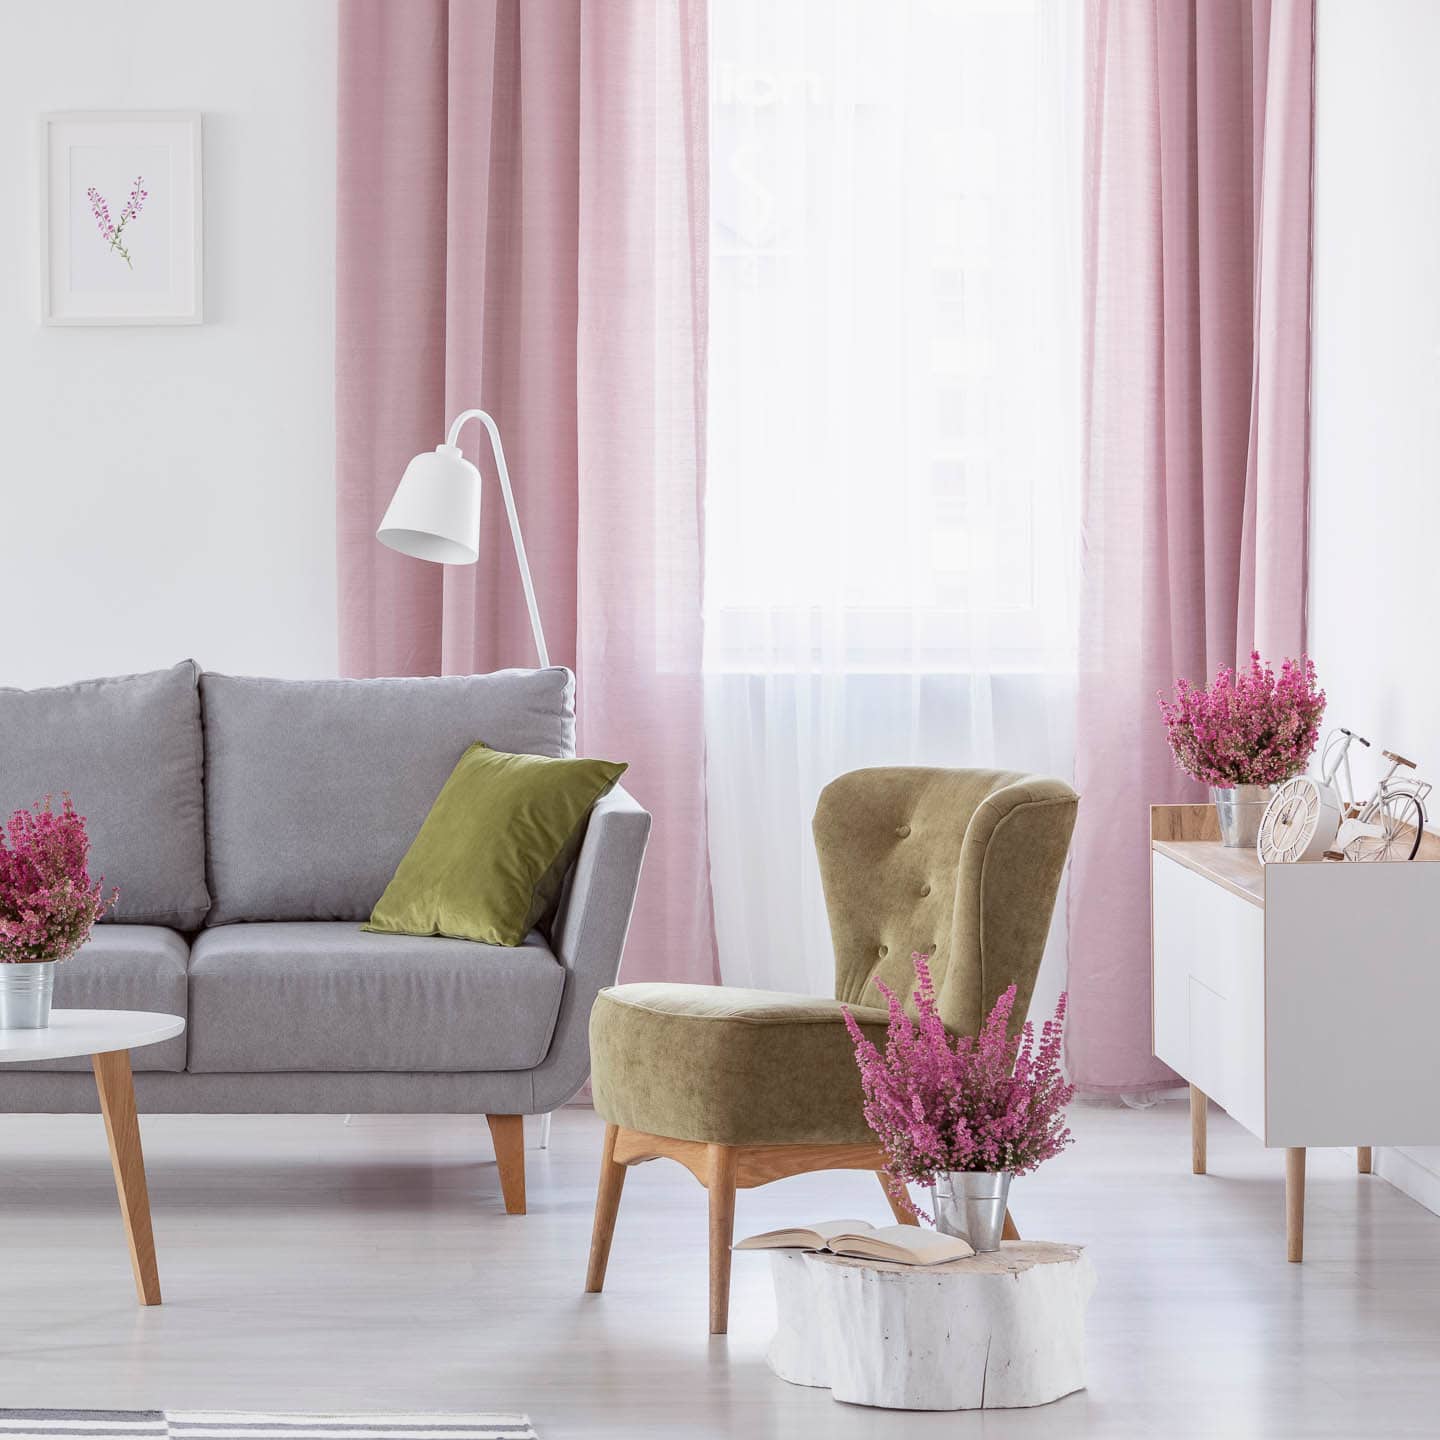 Small living room with gray sofa, green slipper chair and pink panel curtains